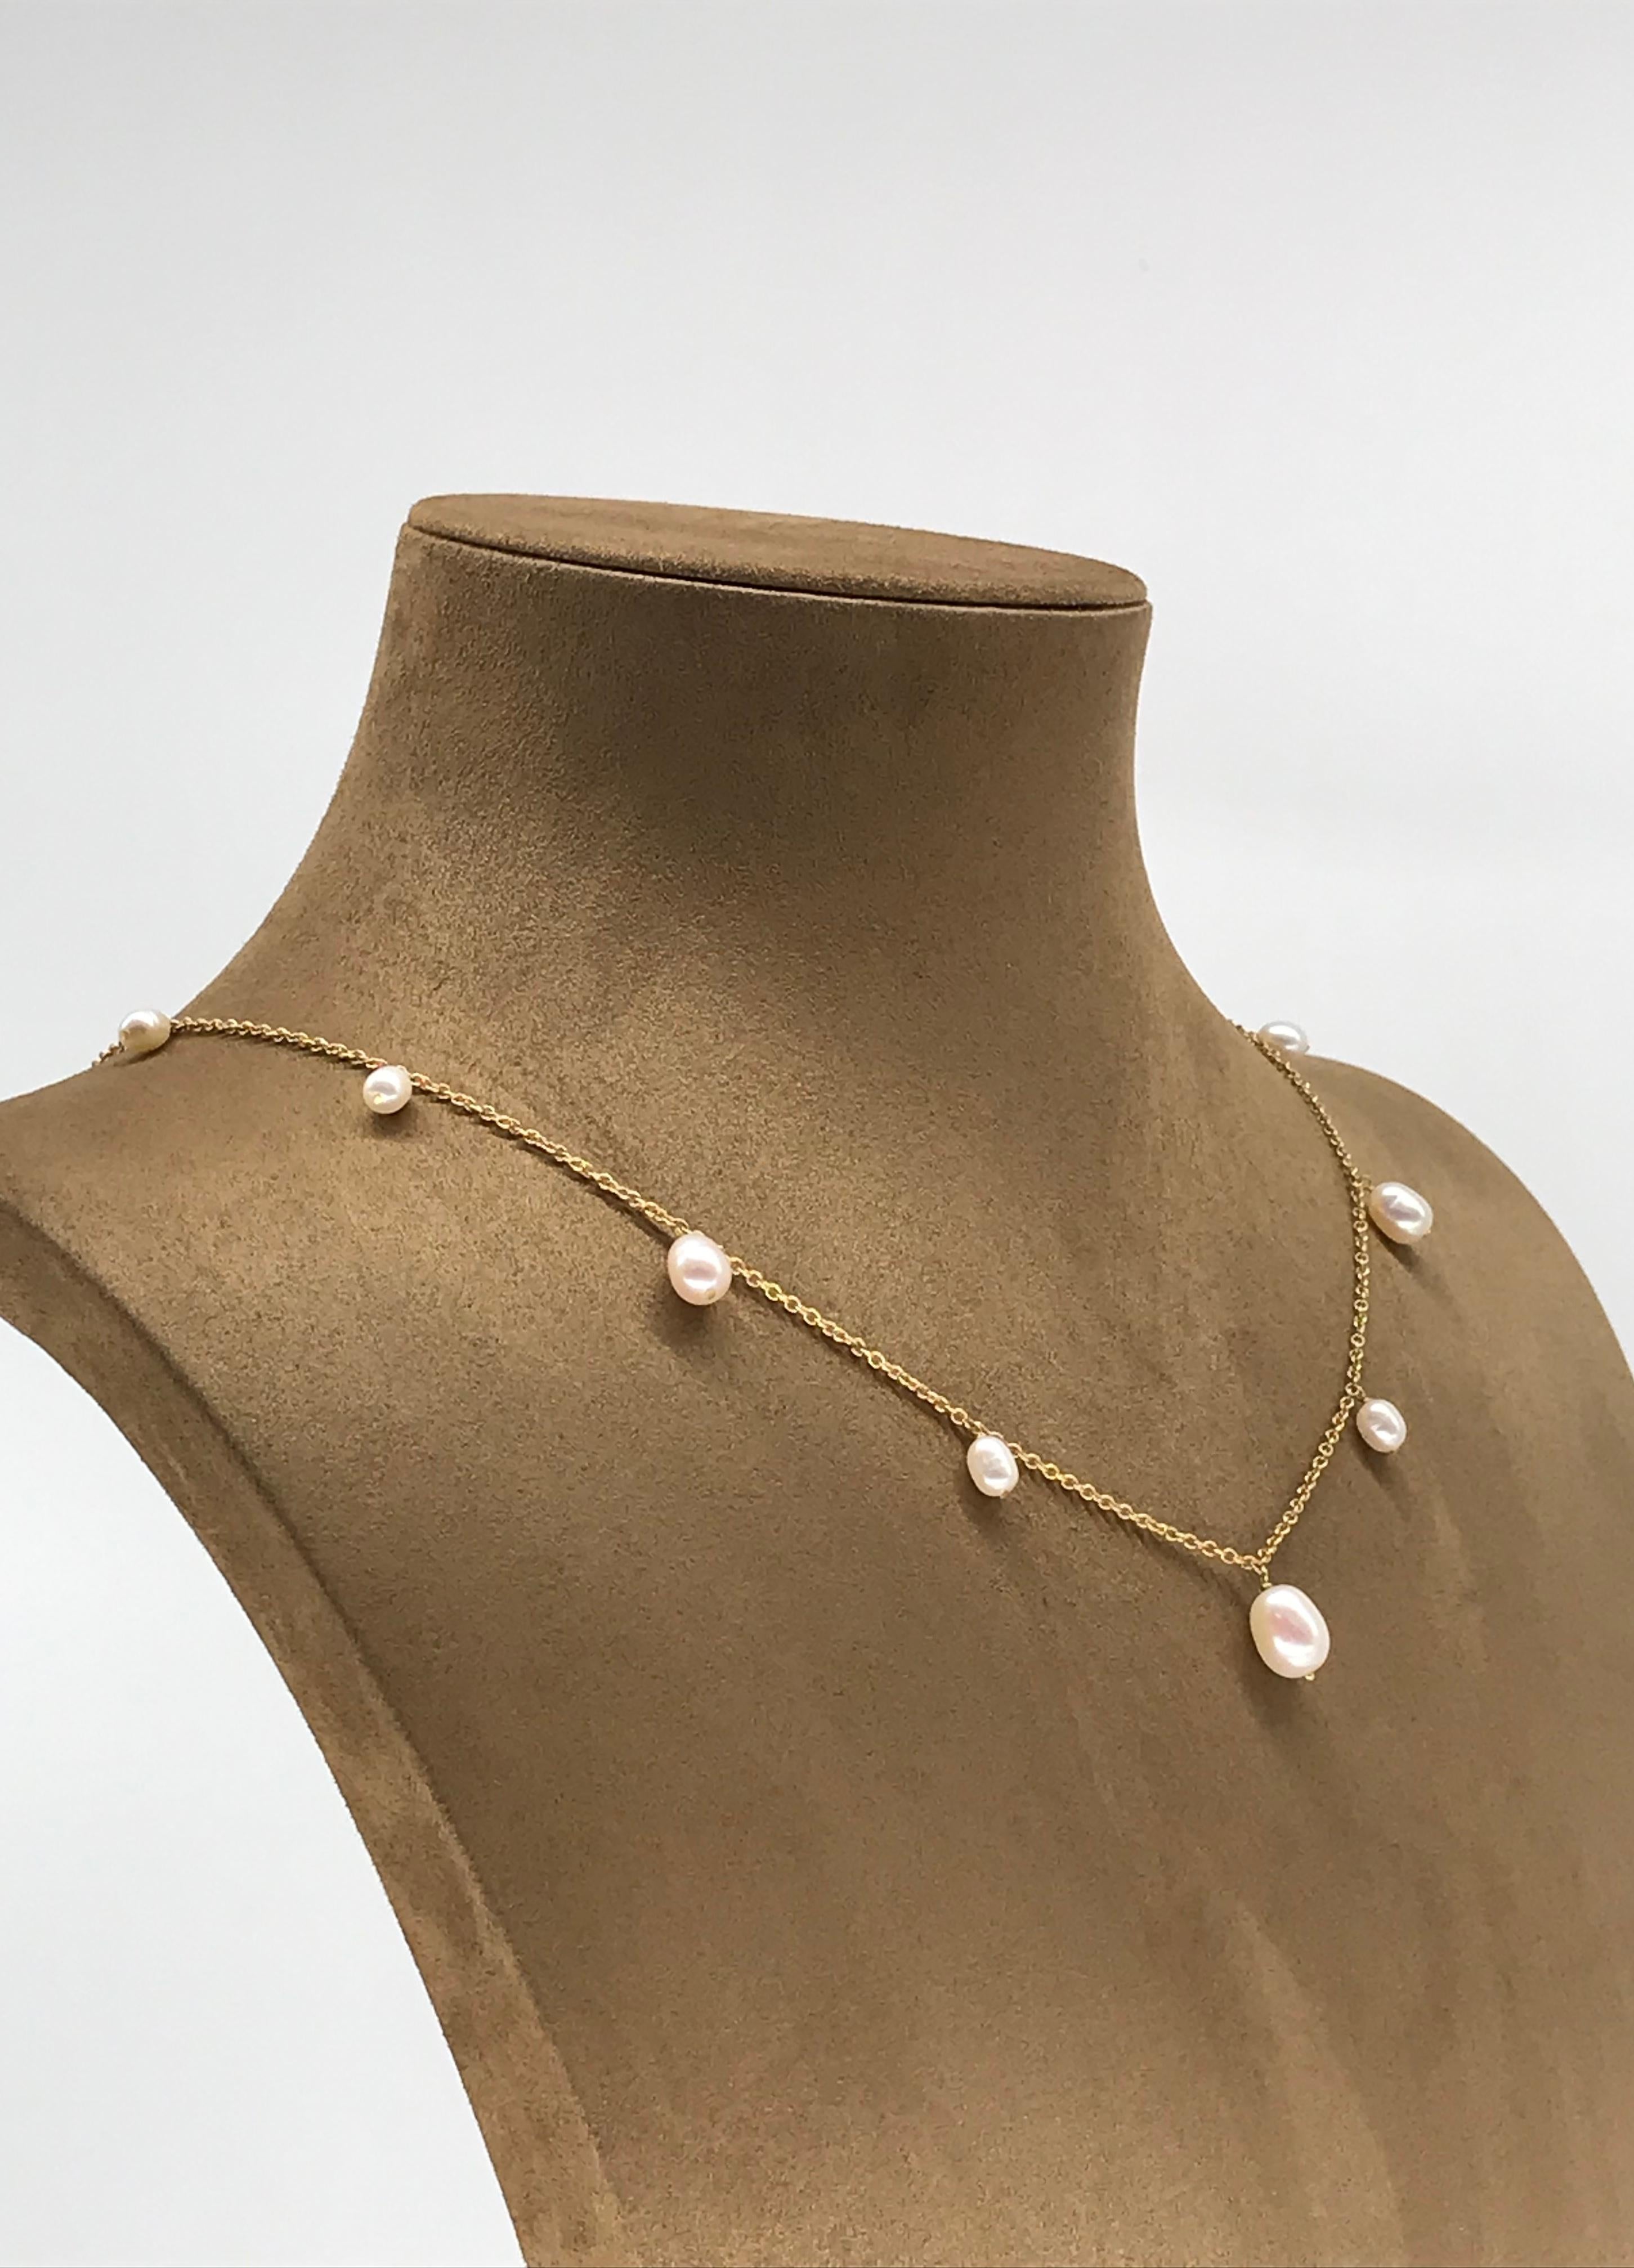 Contemporary Yellow Gold 18 Karat Chain and Natural Pearls Necklaces